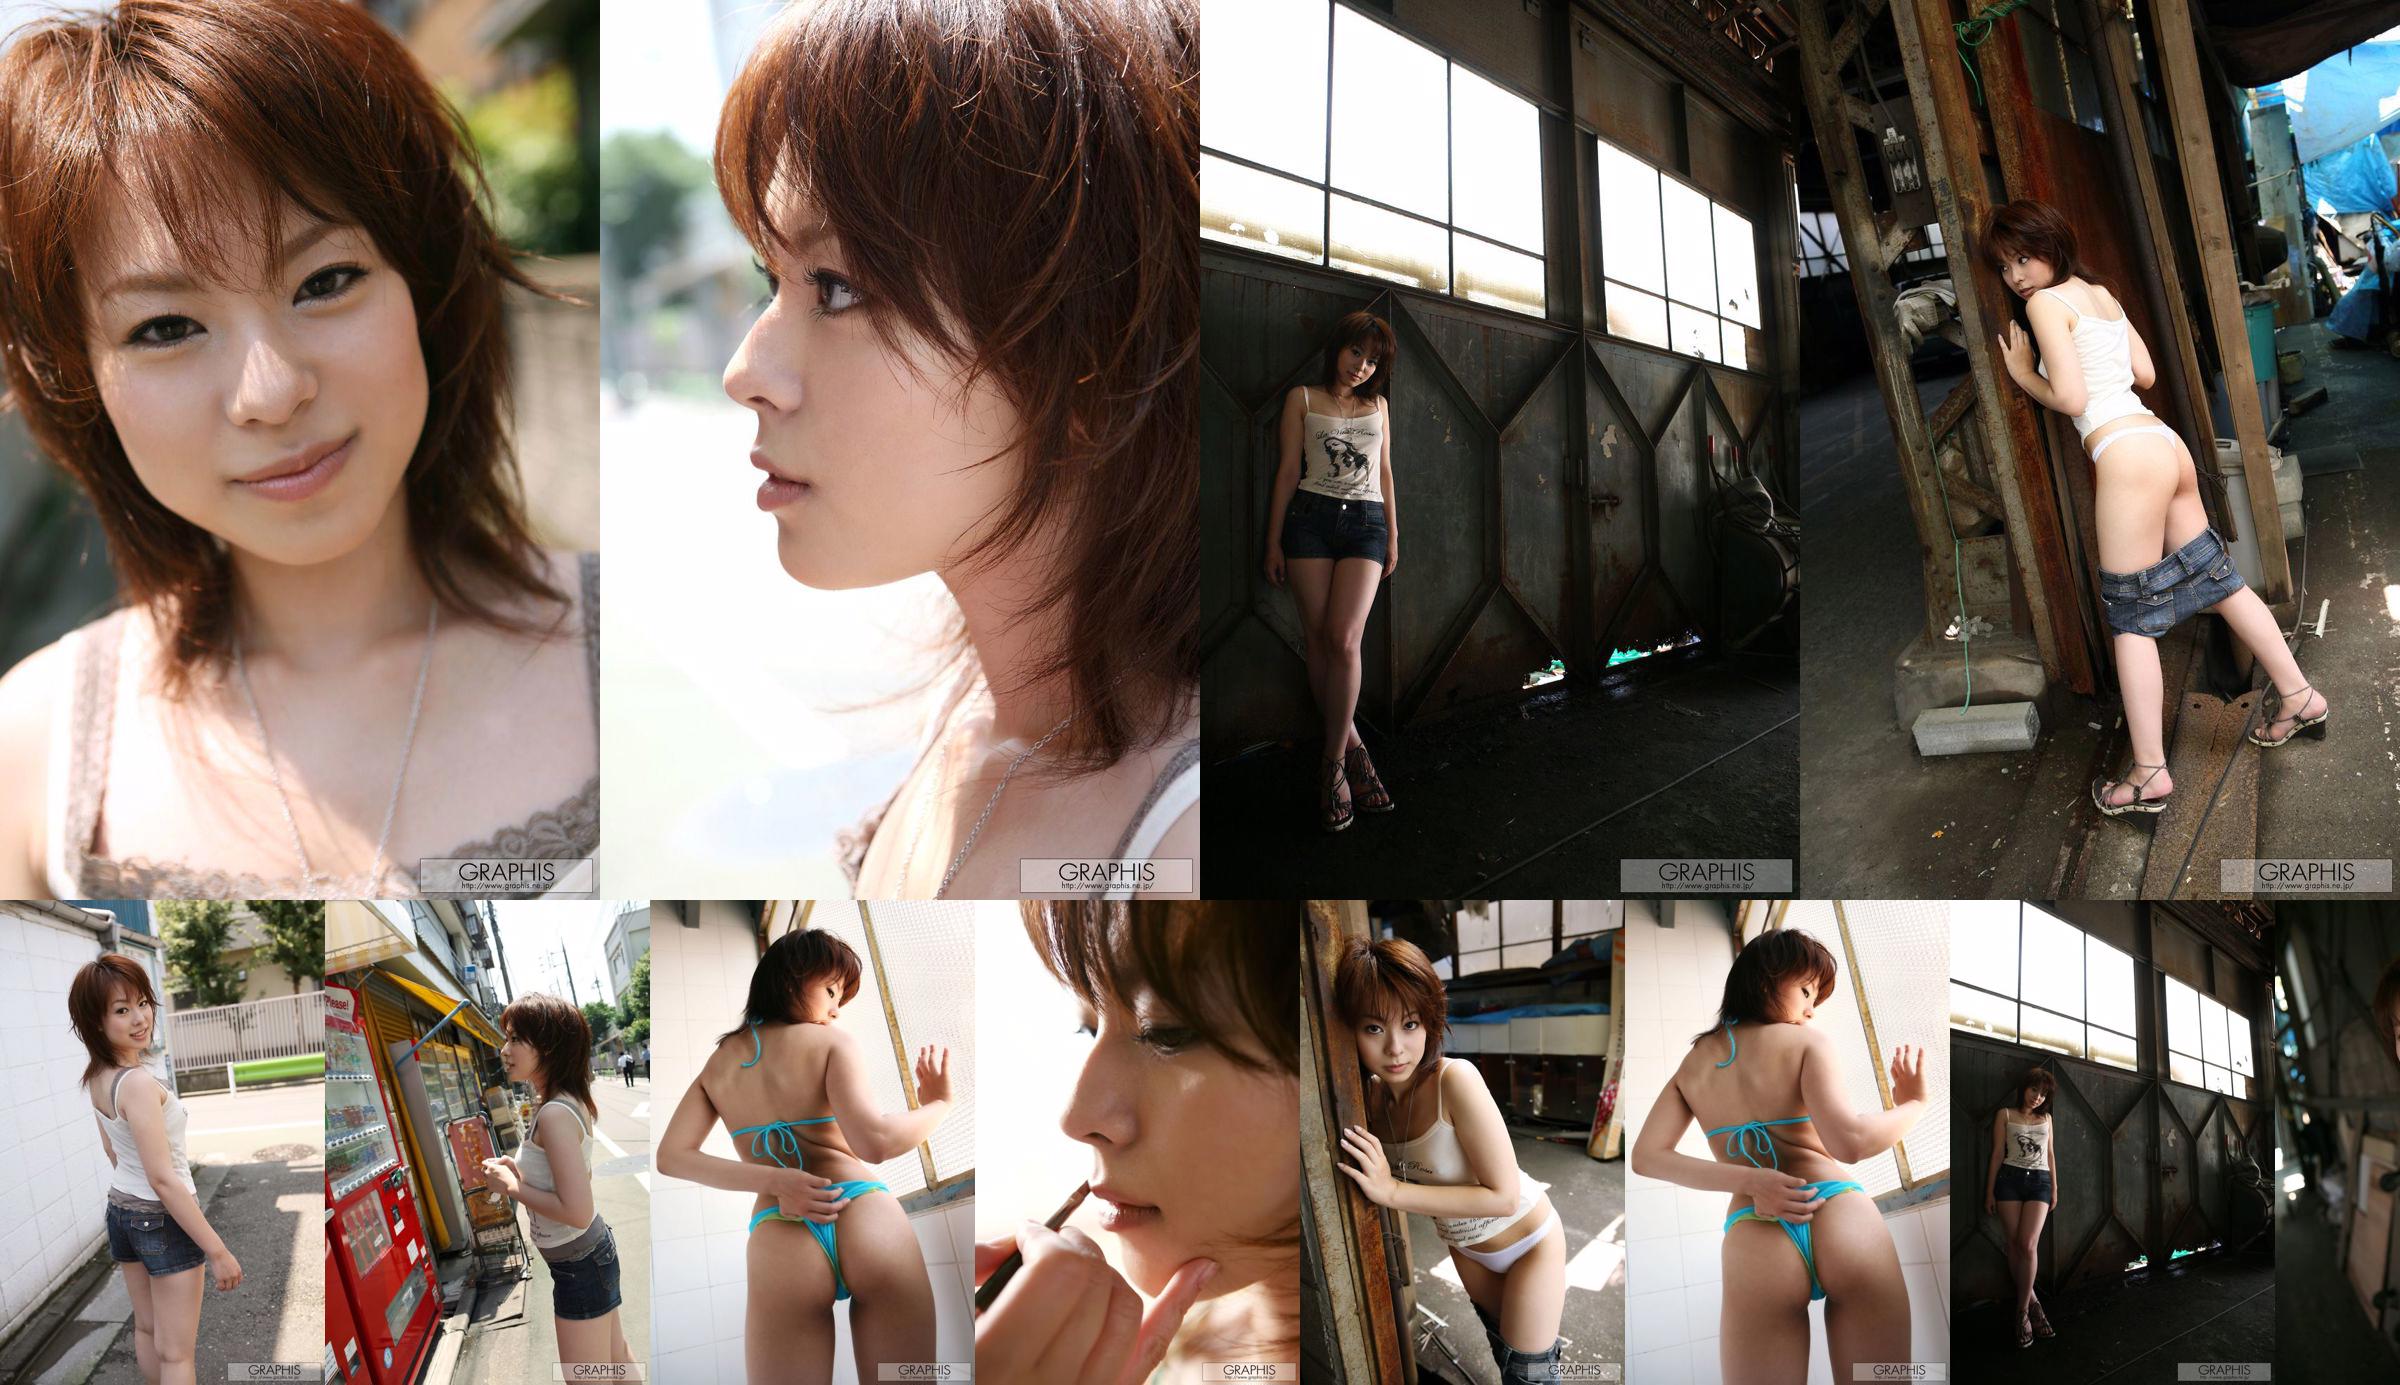 Mina Manabe Mina Manabe [Graphis] First Gravure First Take Off Daughter No.6e8486 หน้า 1